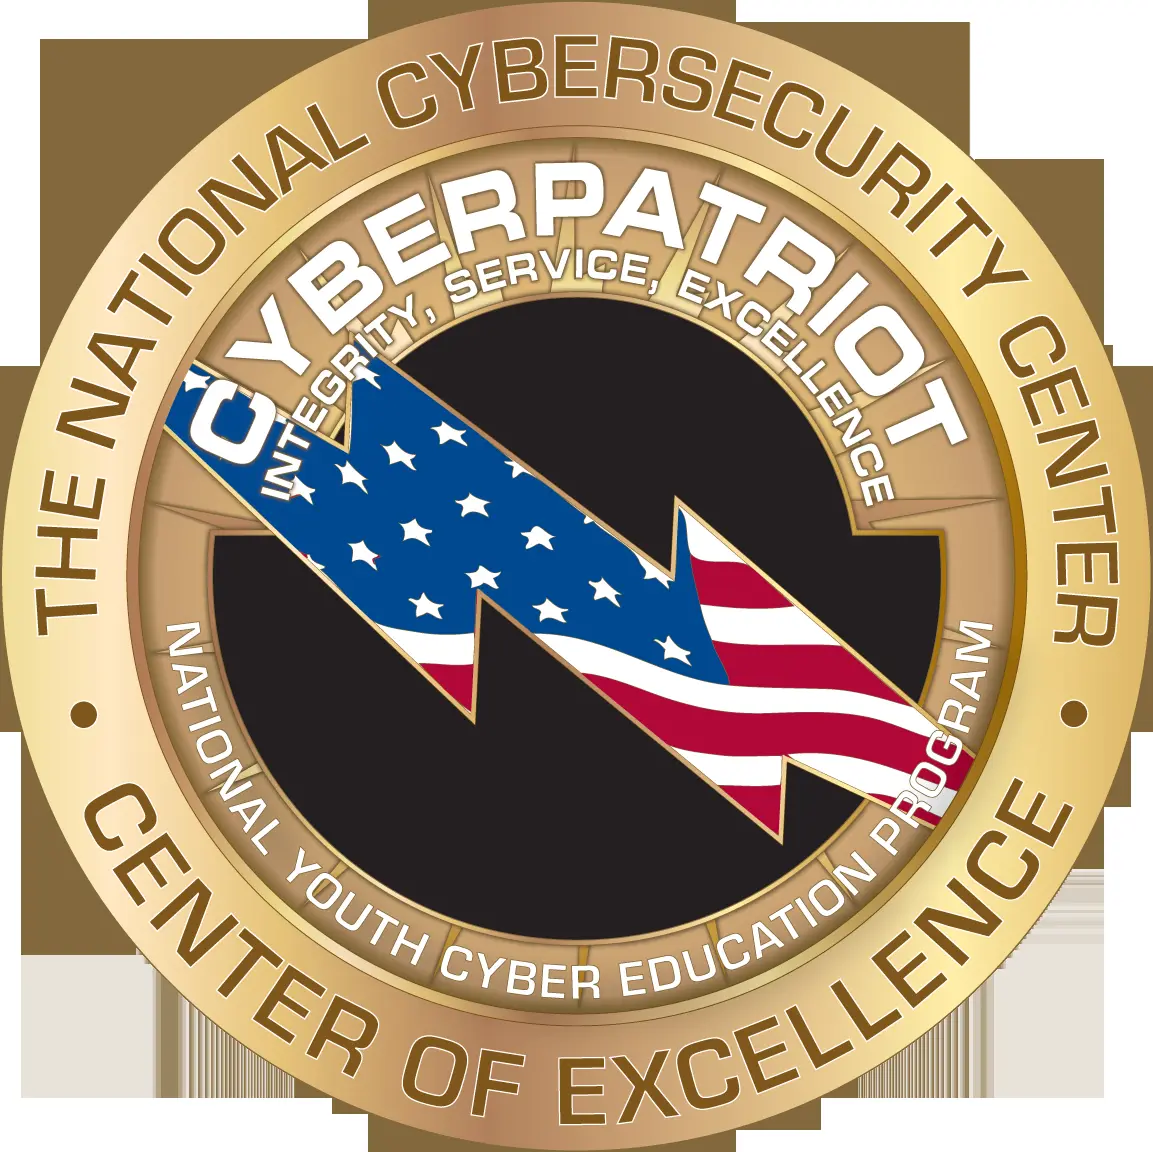 Cyber-Nation 970, Inc